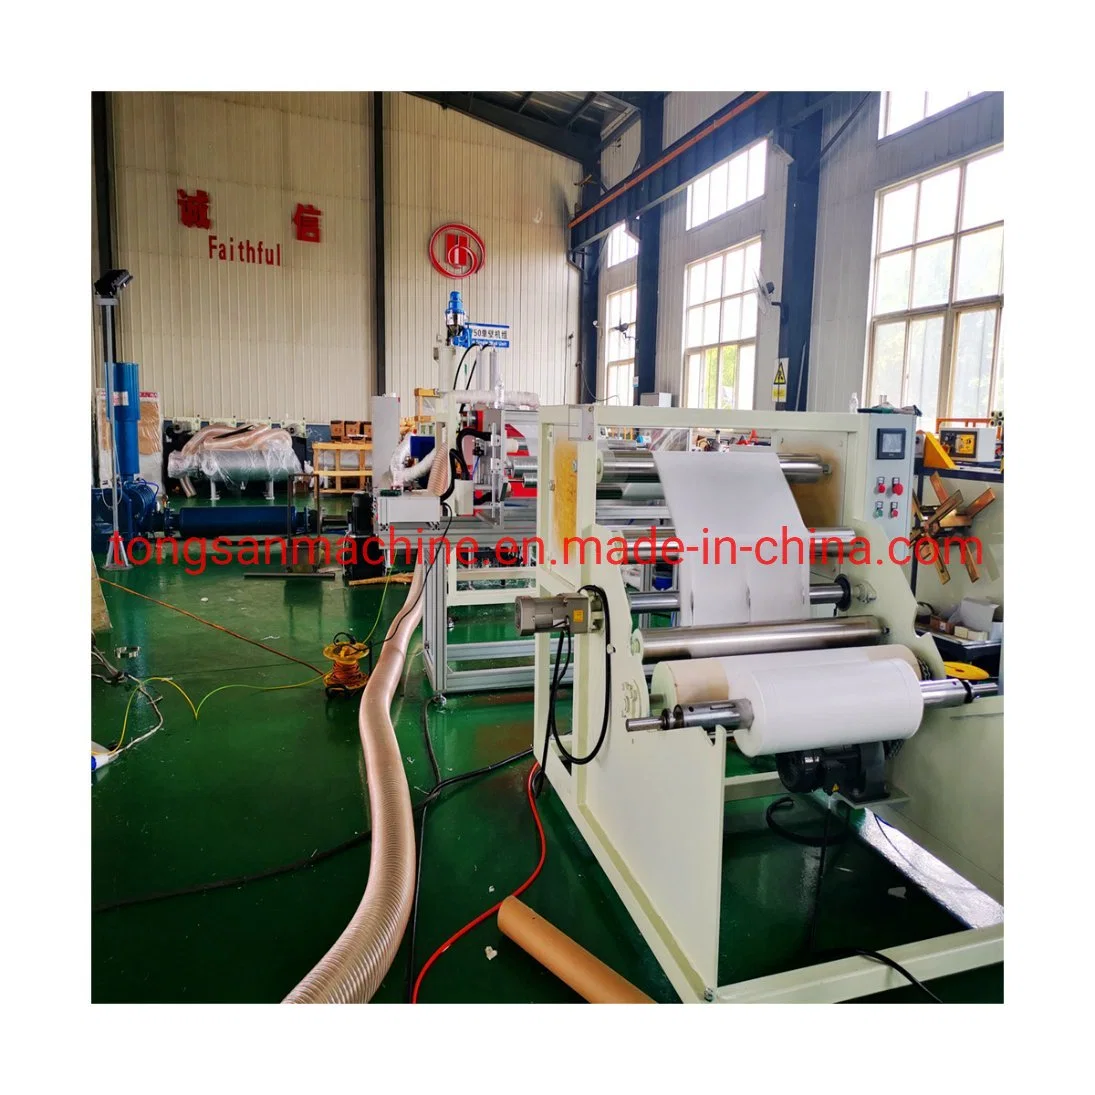 Bfe Pfe 99 for N95 Face Mask Cloth Fabric Filter Machine /PP Melt Blown Fabric Making Machine